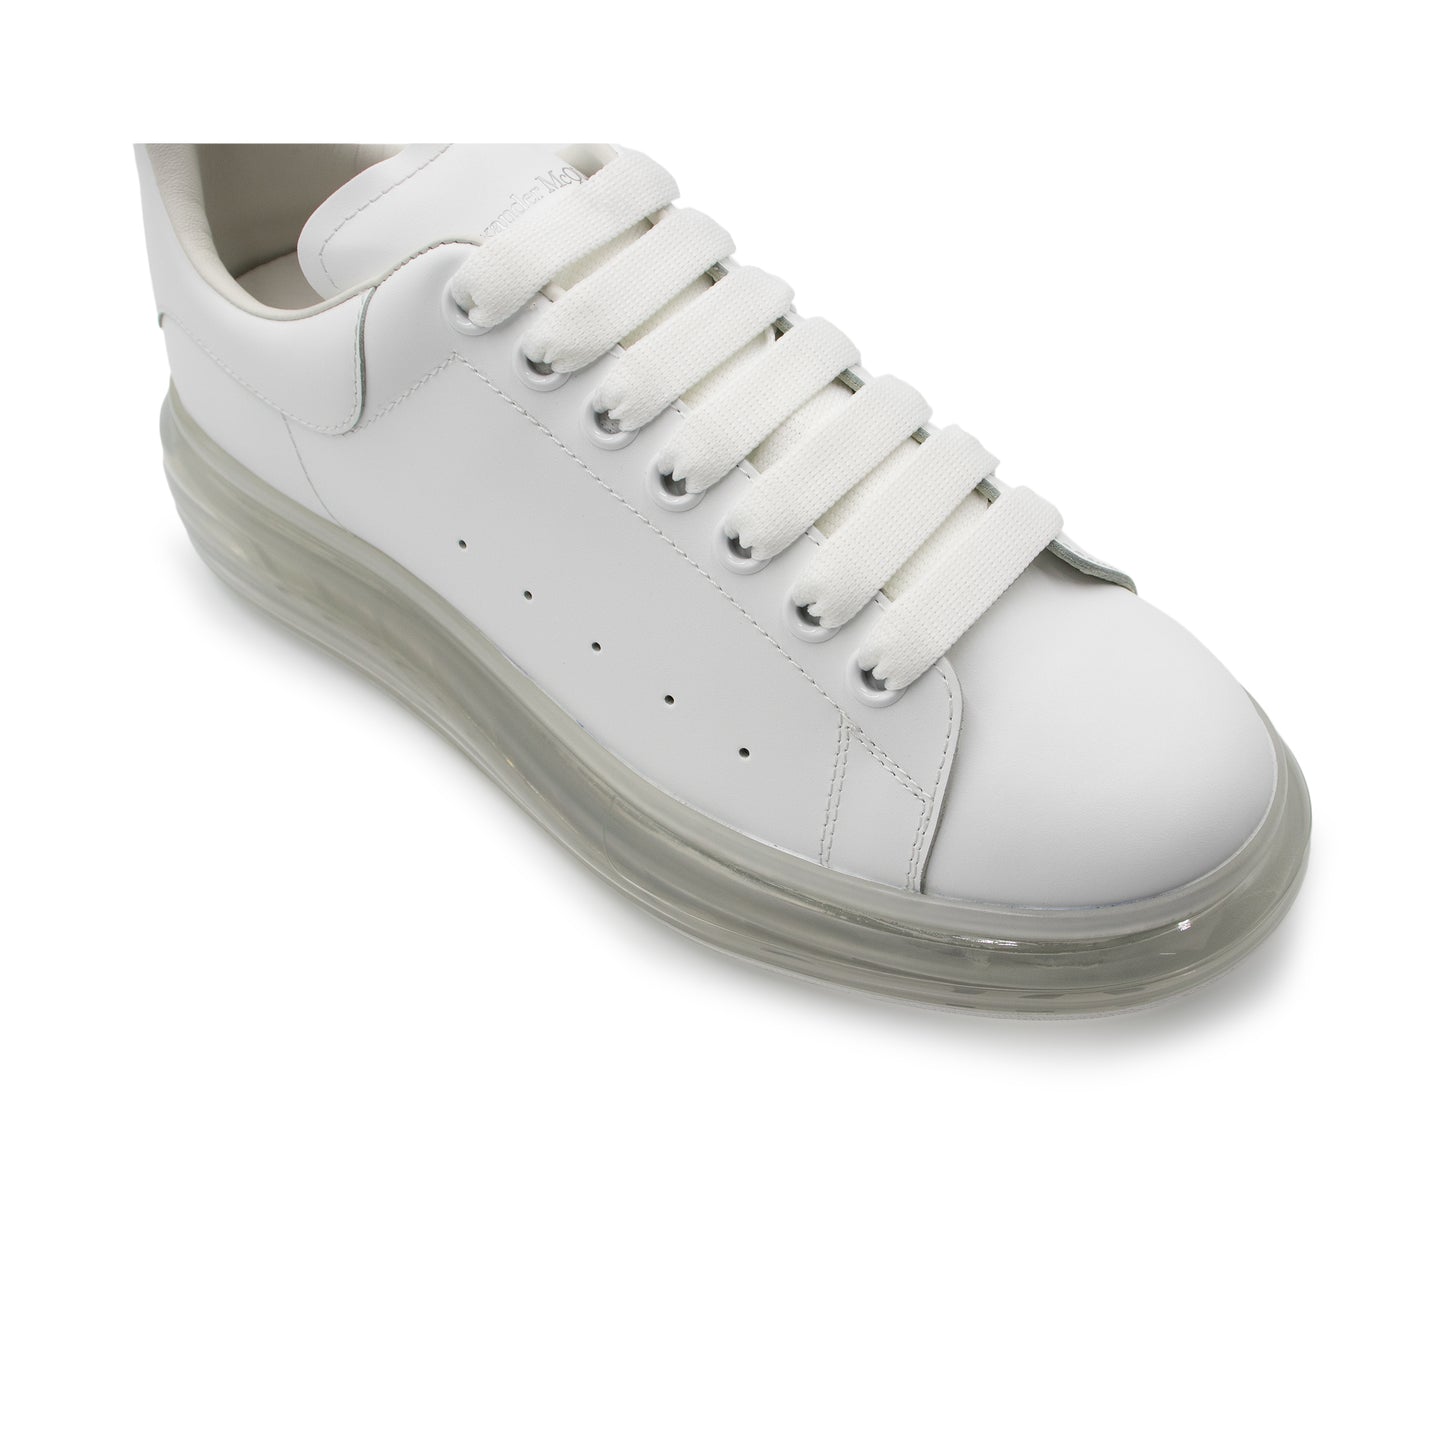 Larry Transparent Sole Sneaker in White/White